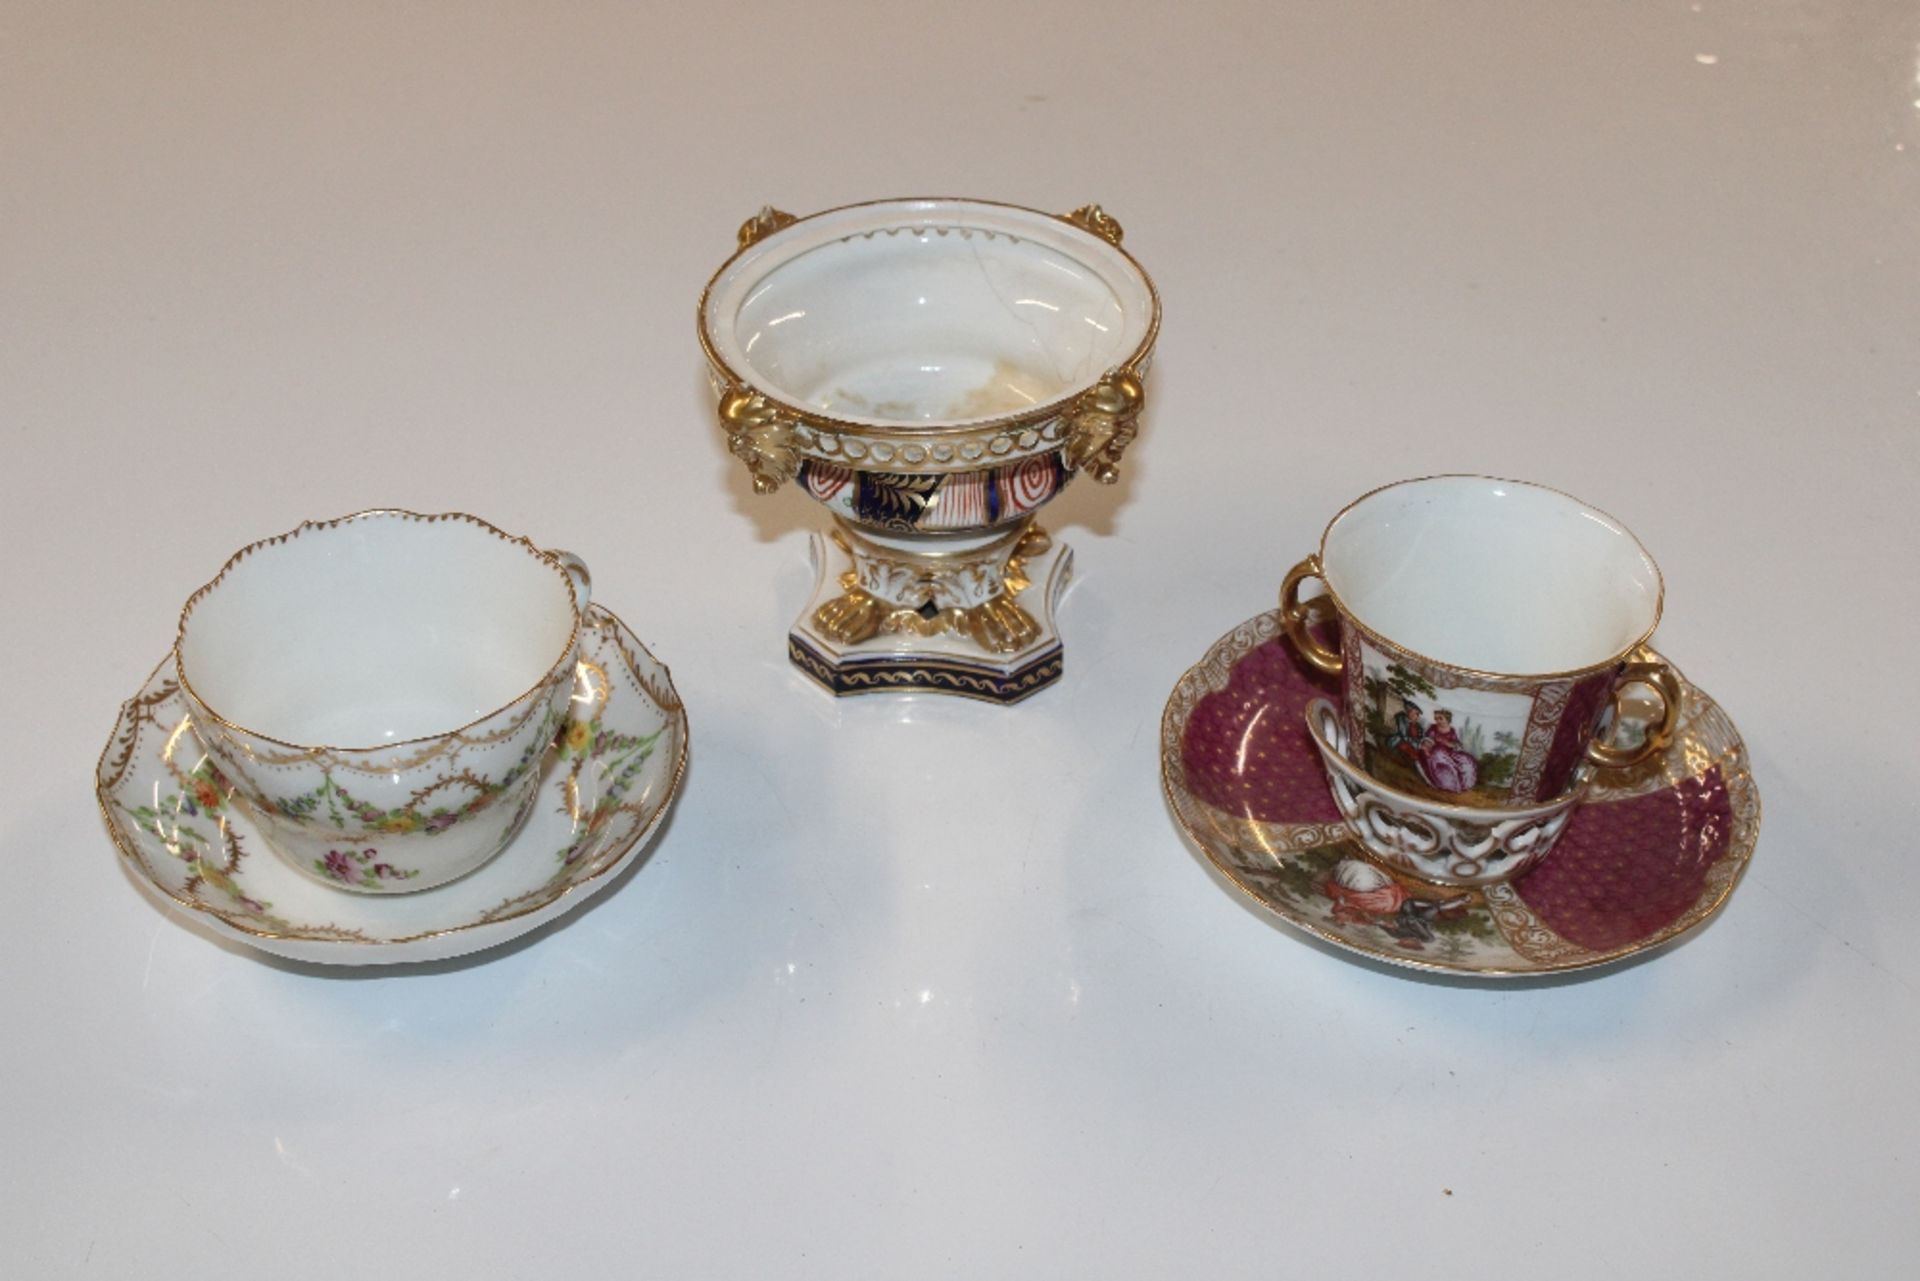 A Dresden porcelain cup and saucer; a Continental